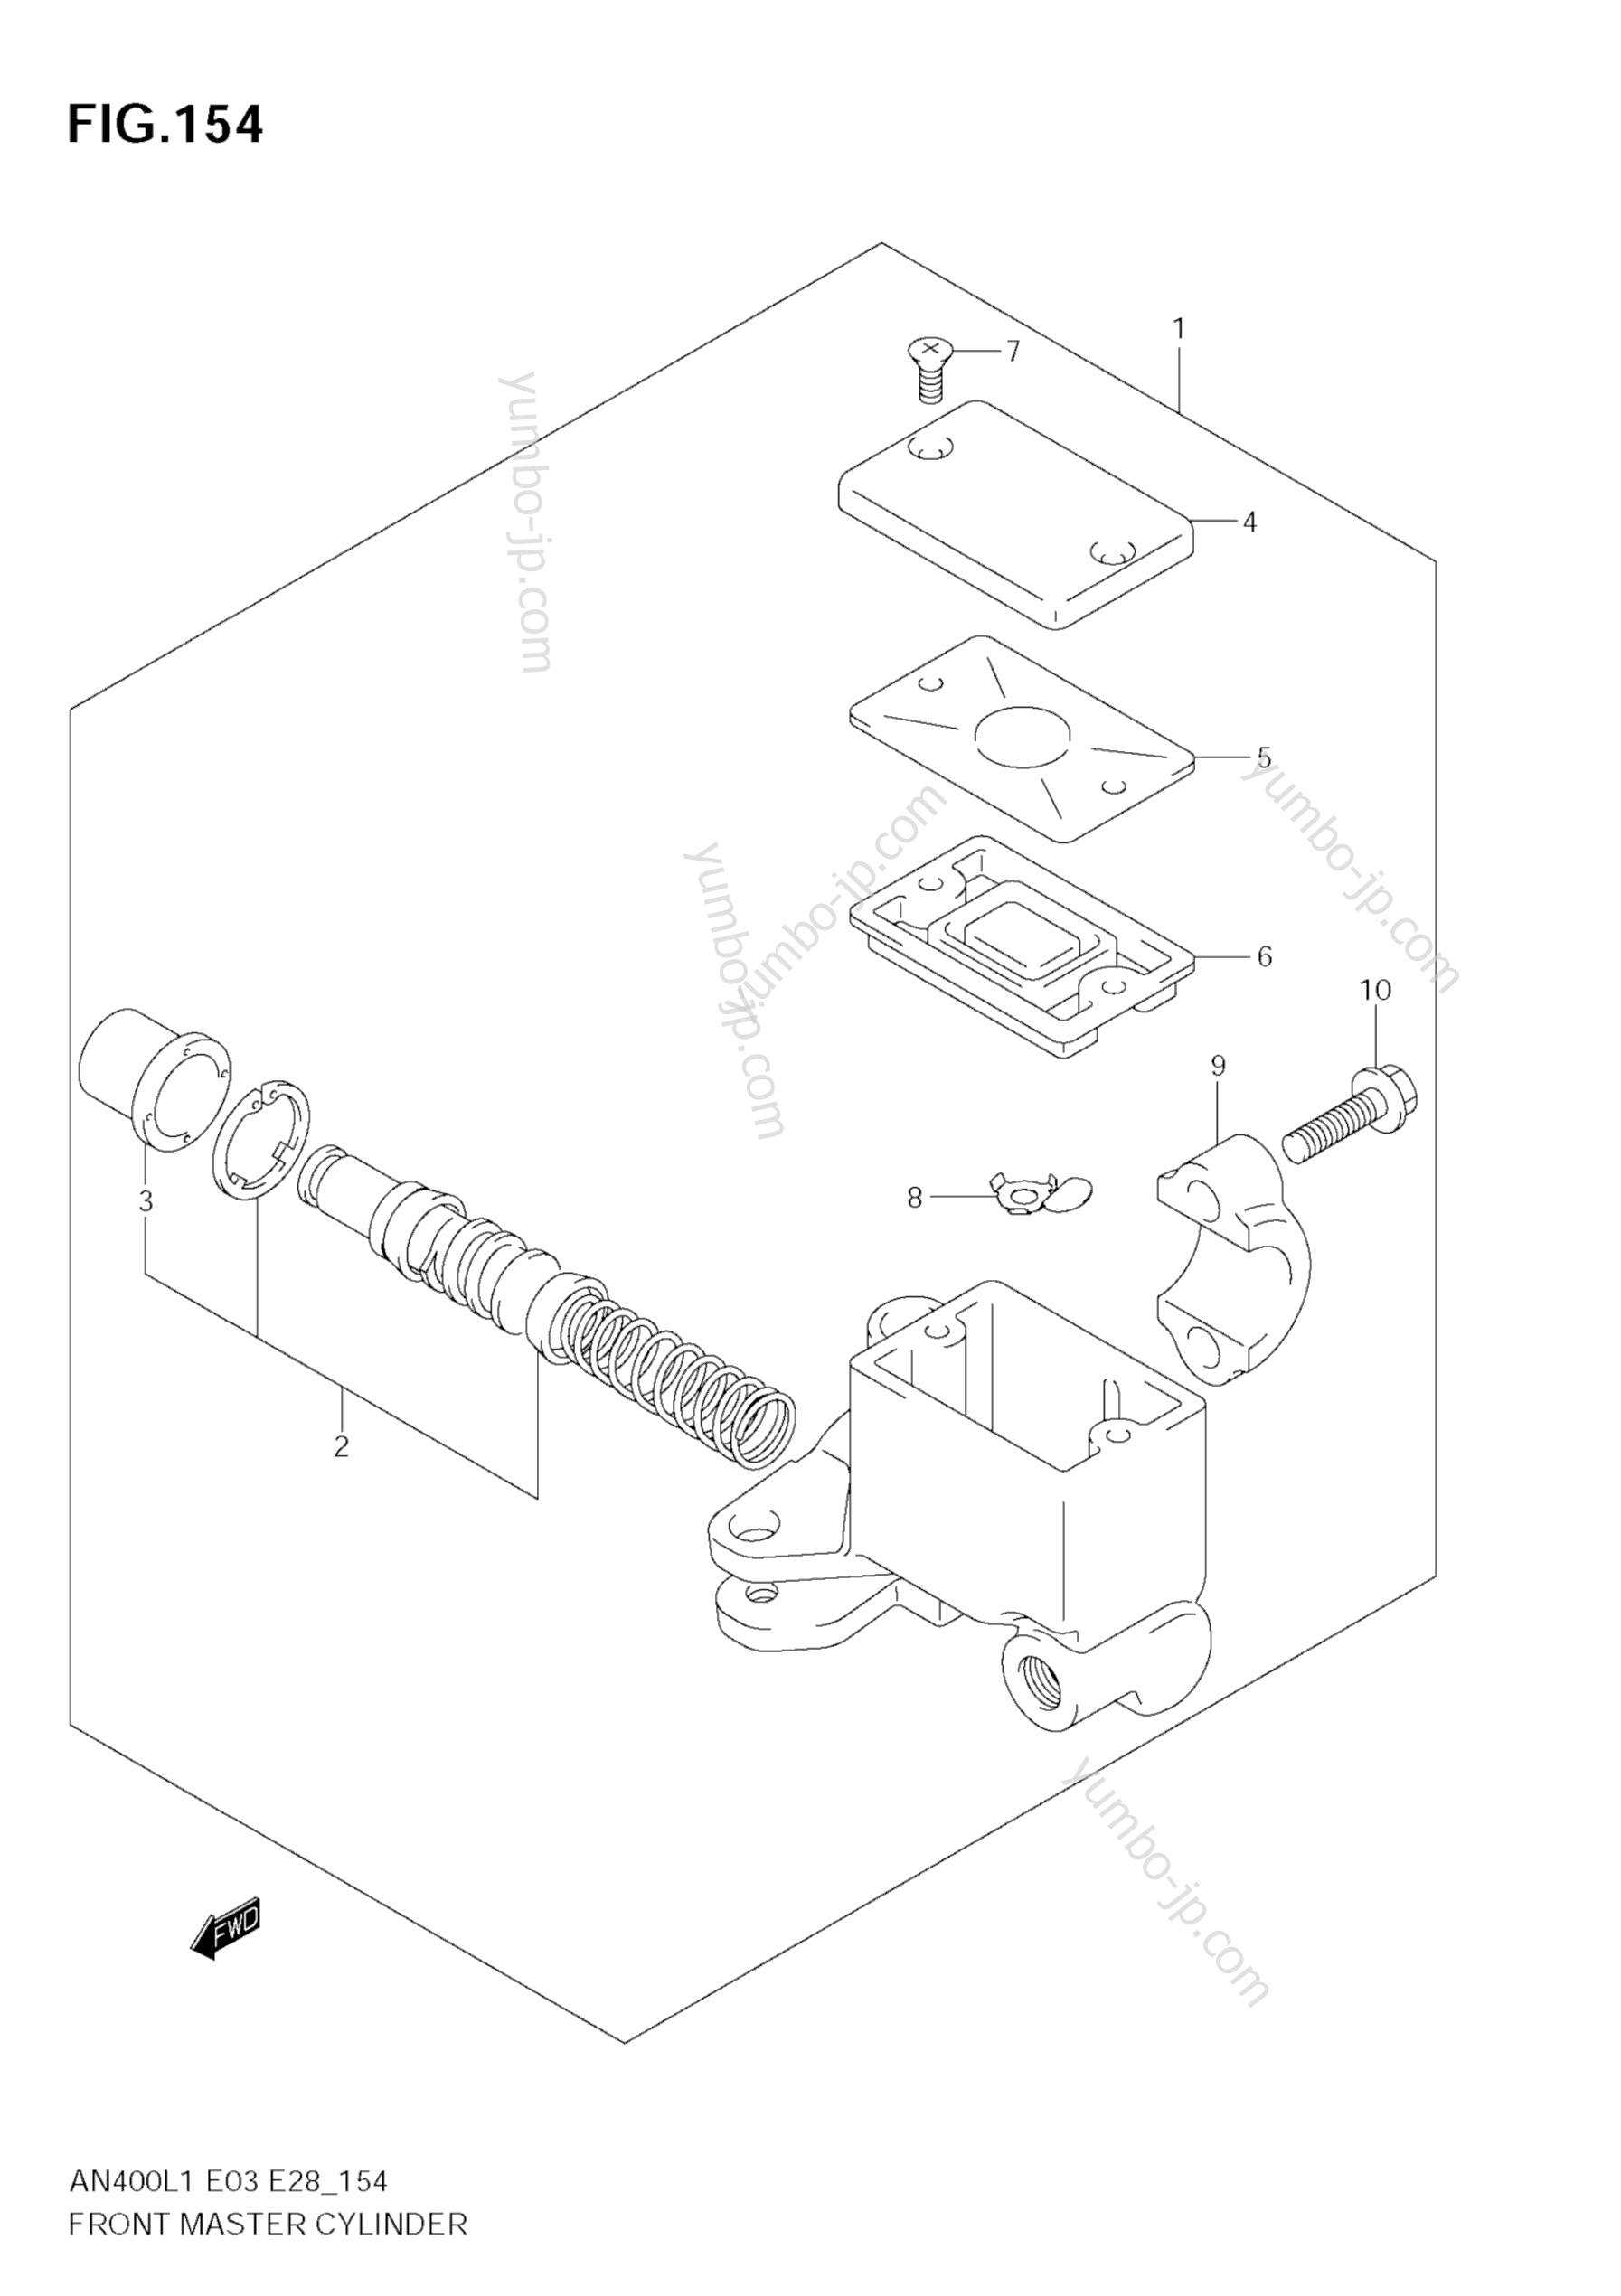 FRONT MASTER CYLINDER (AN400 L1 E33) for scooters SUZUKI Burgman (AN400A) 2011 year